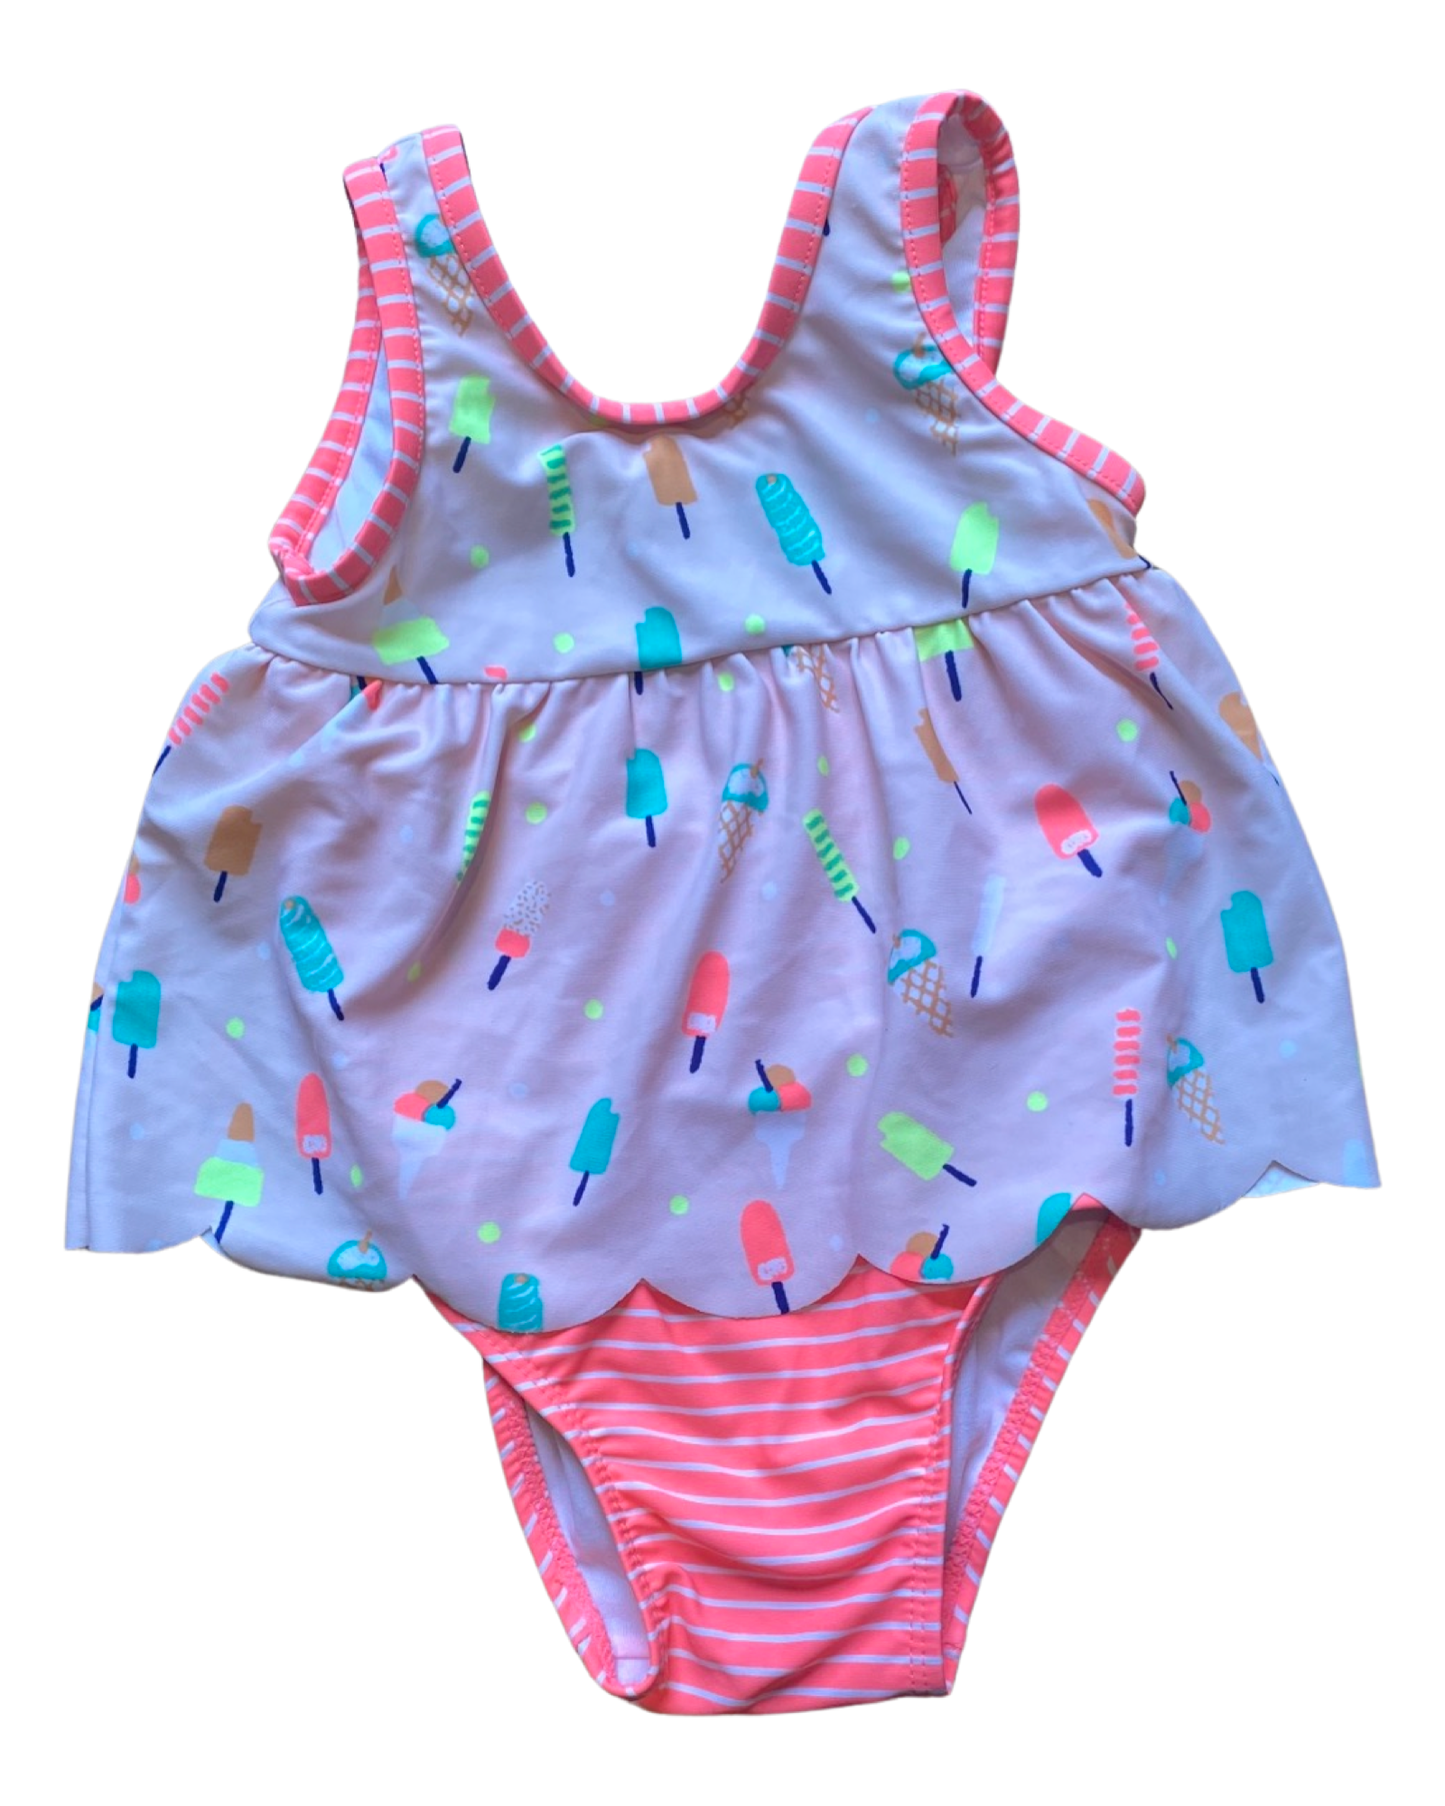 Baby Gap lolly print swimsuit (size 12-18mths)